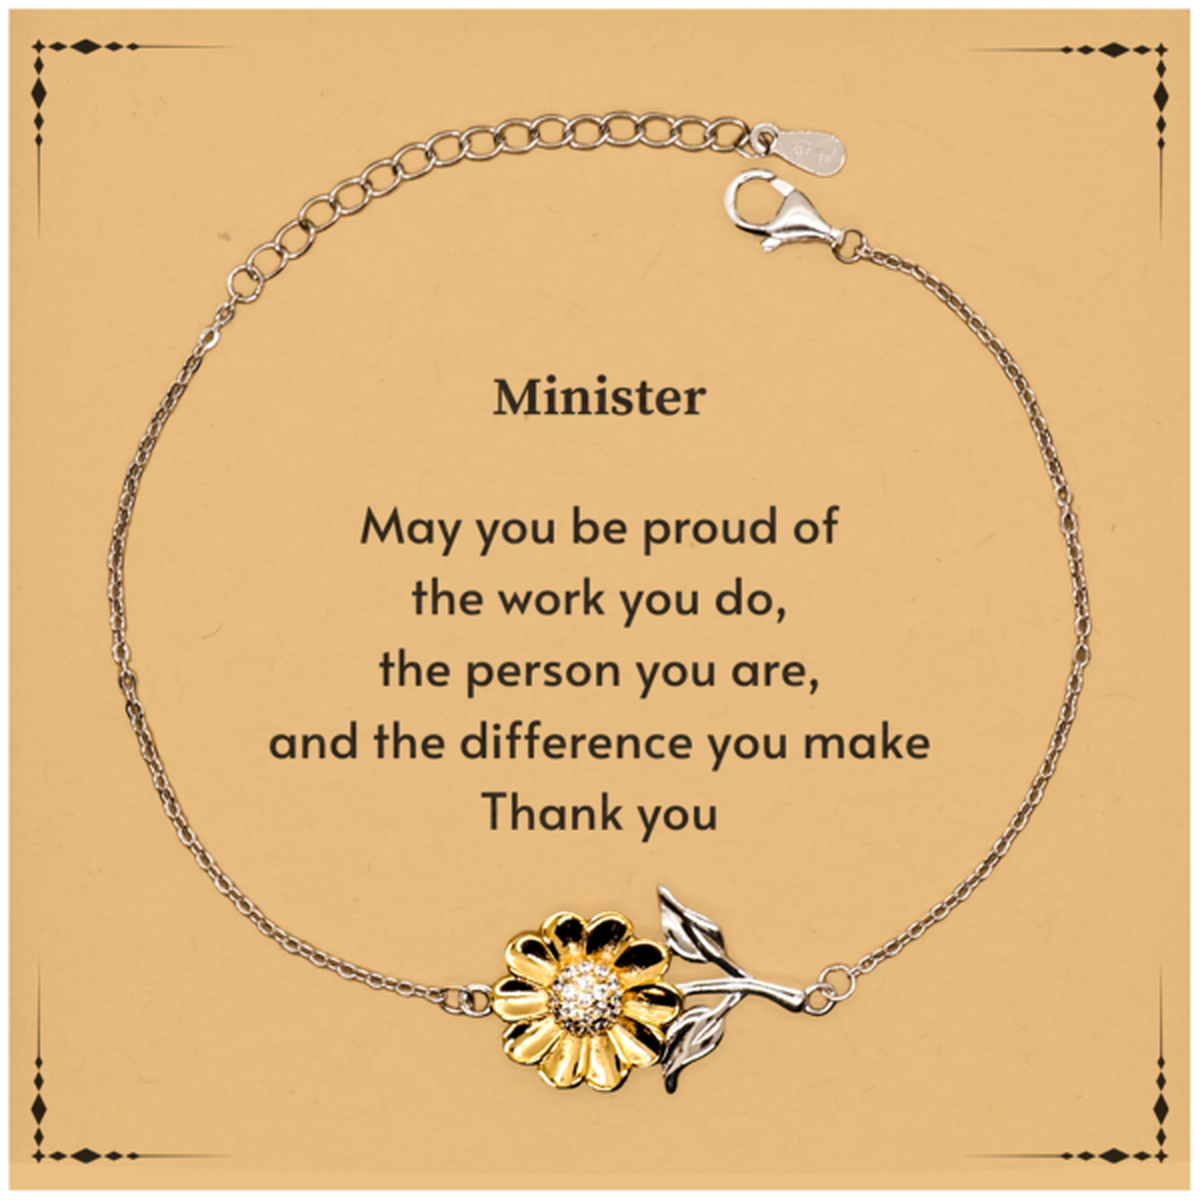 Heartwarming Sunflower Bracelet Retirement Coworkers Gifts for Minister, Minister May You be proud of the work you do, the person you are Gifts for Boss Men Women Friends